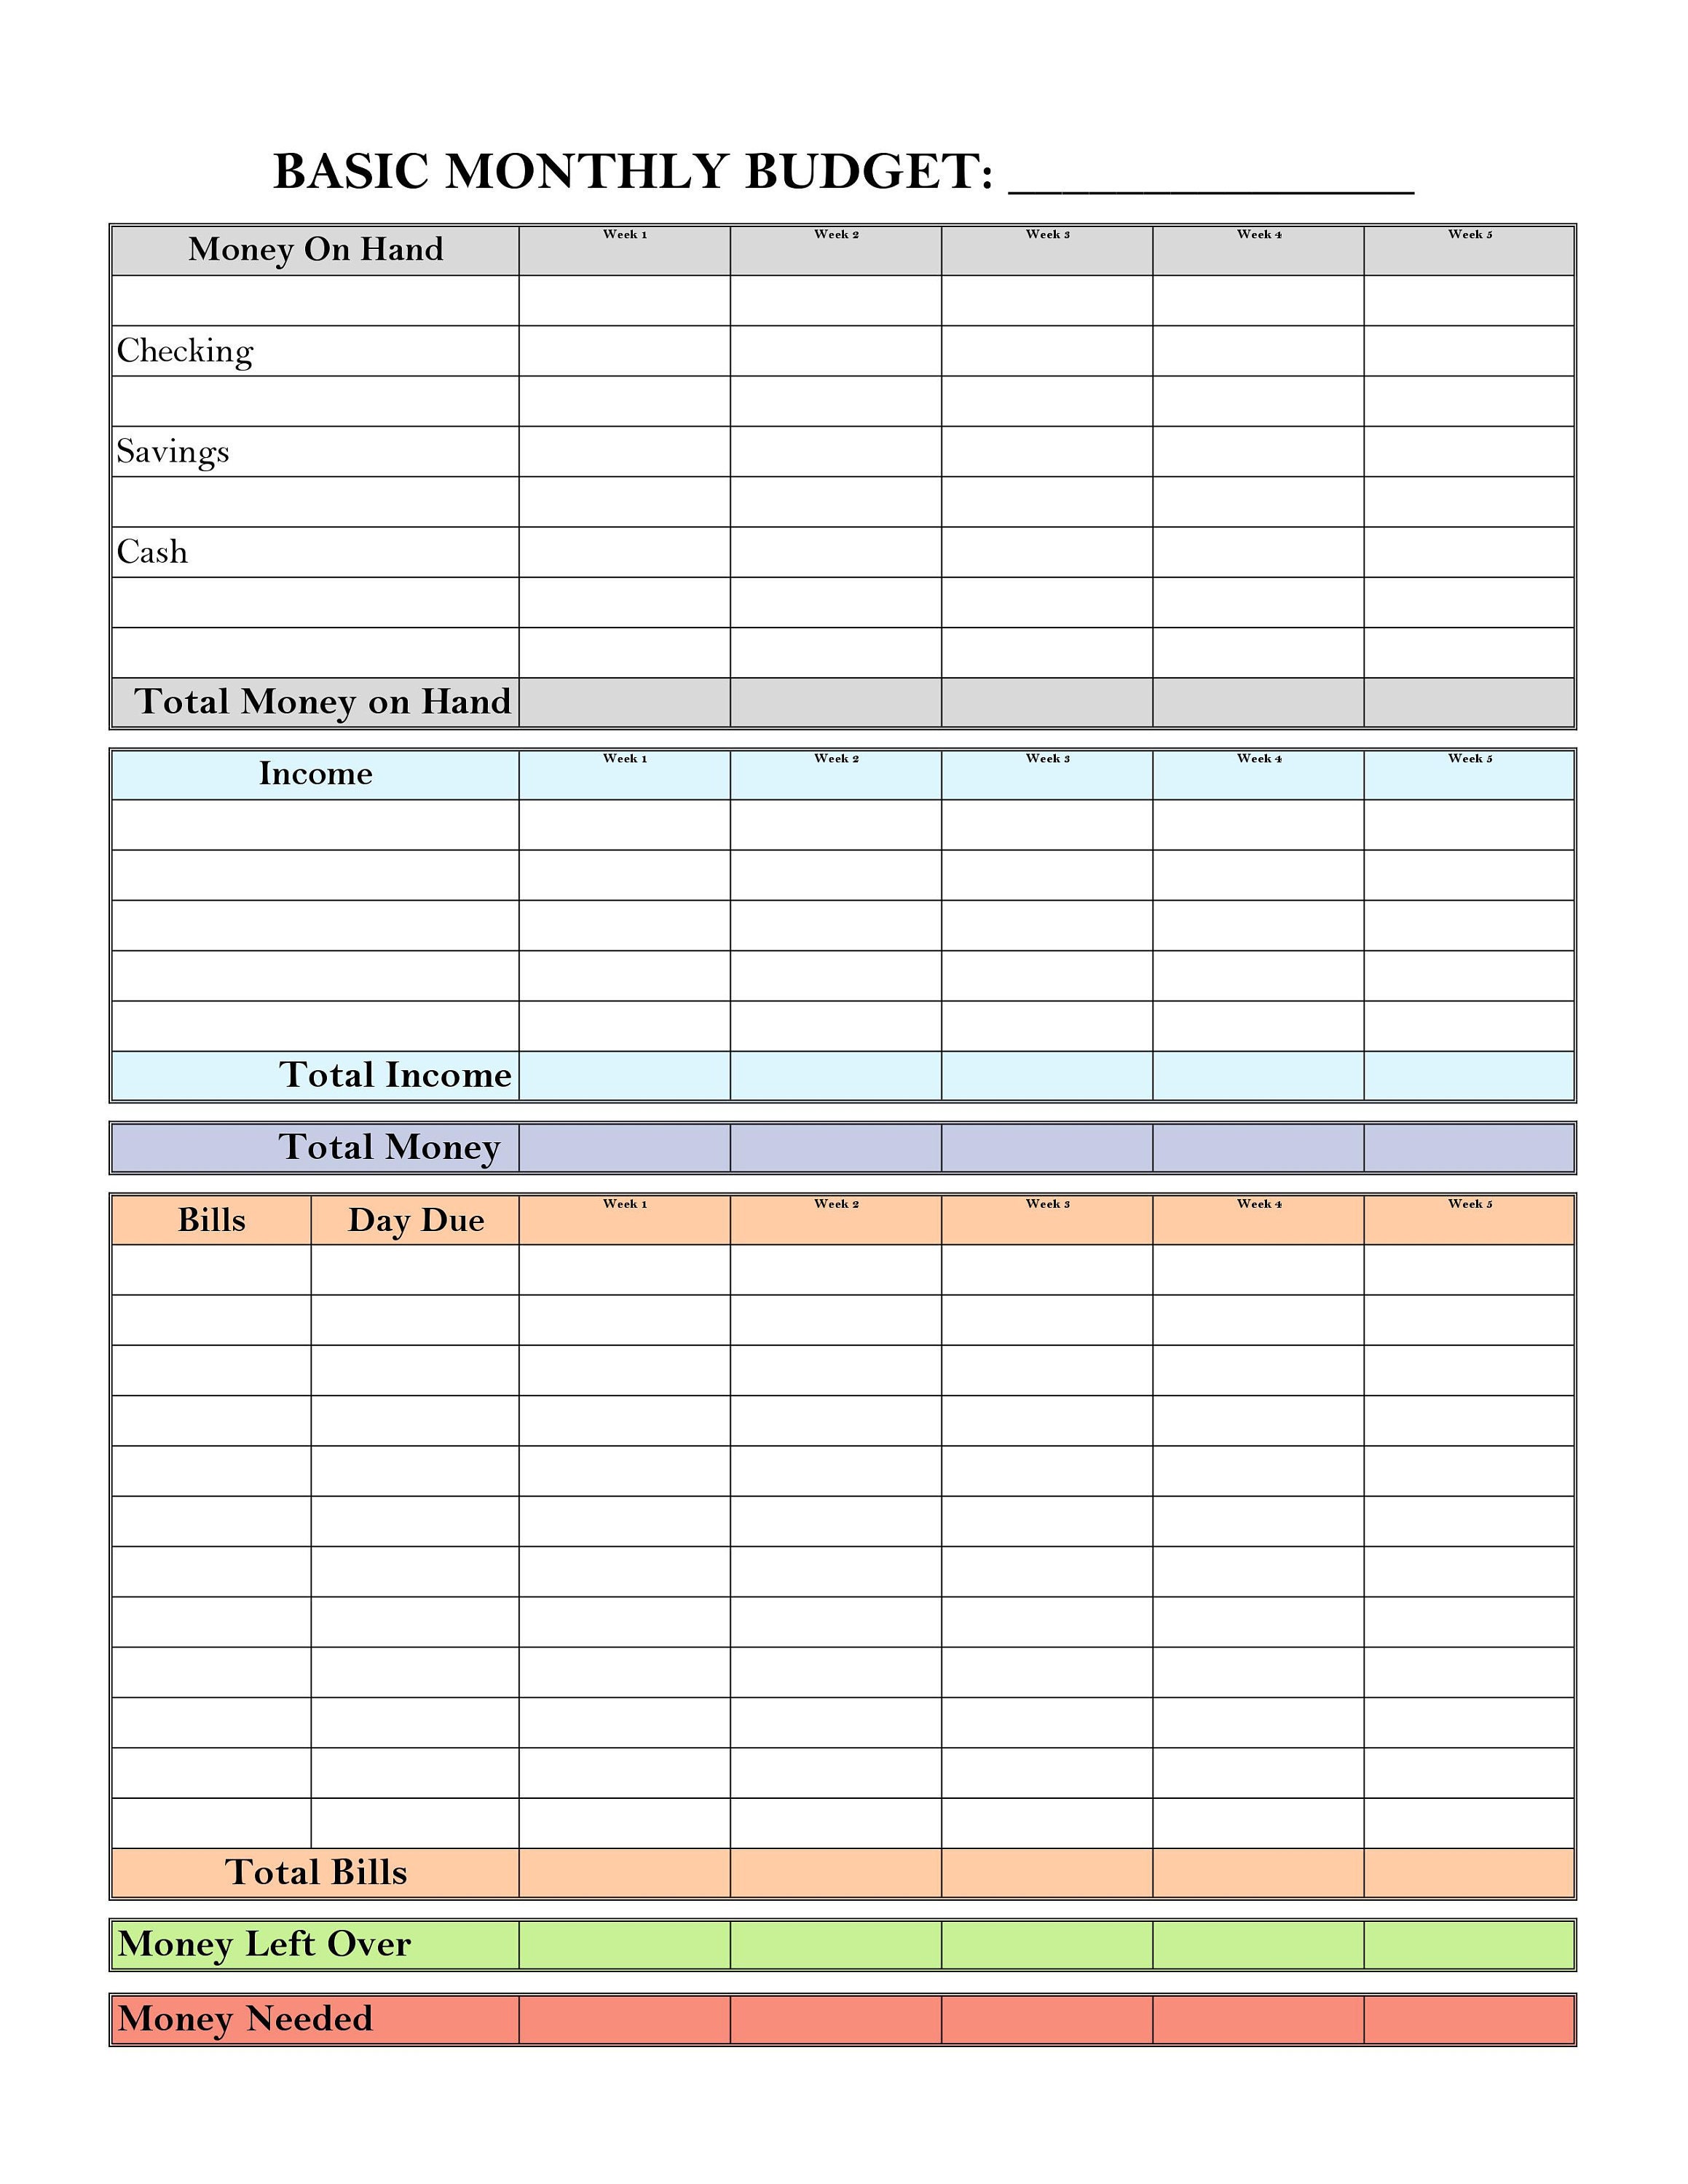 Basic Monthly Budget Form For Weekly Pay PDF & Google Sheet Etsy